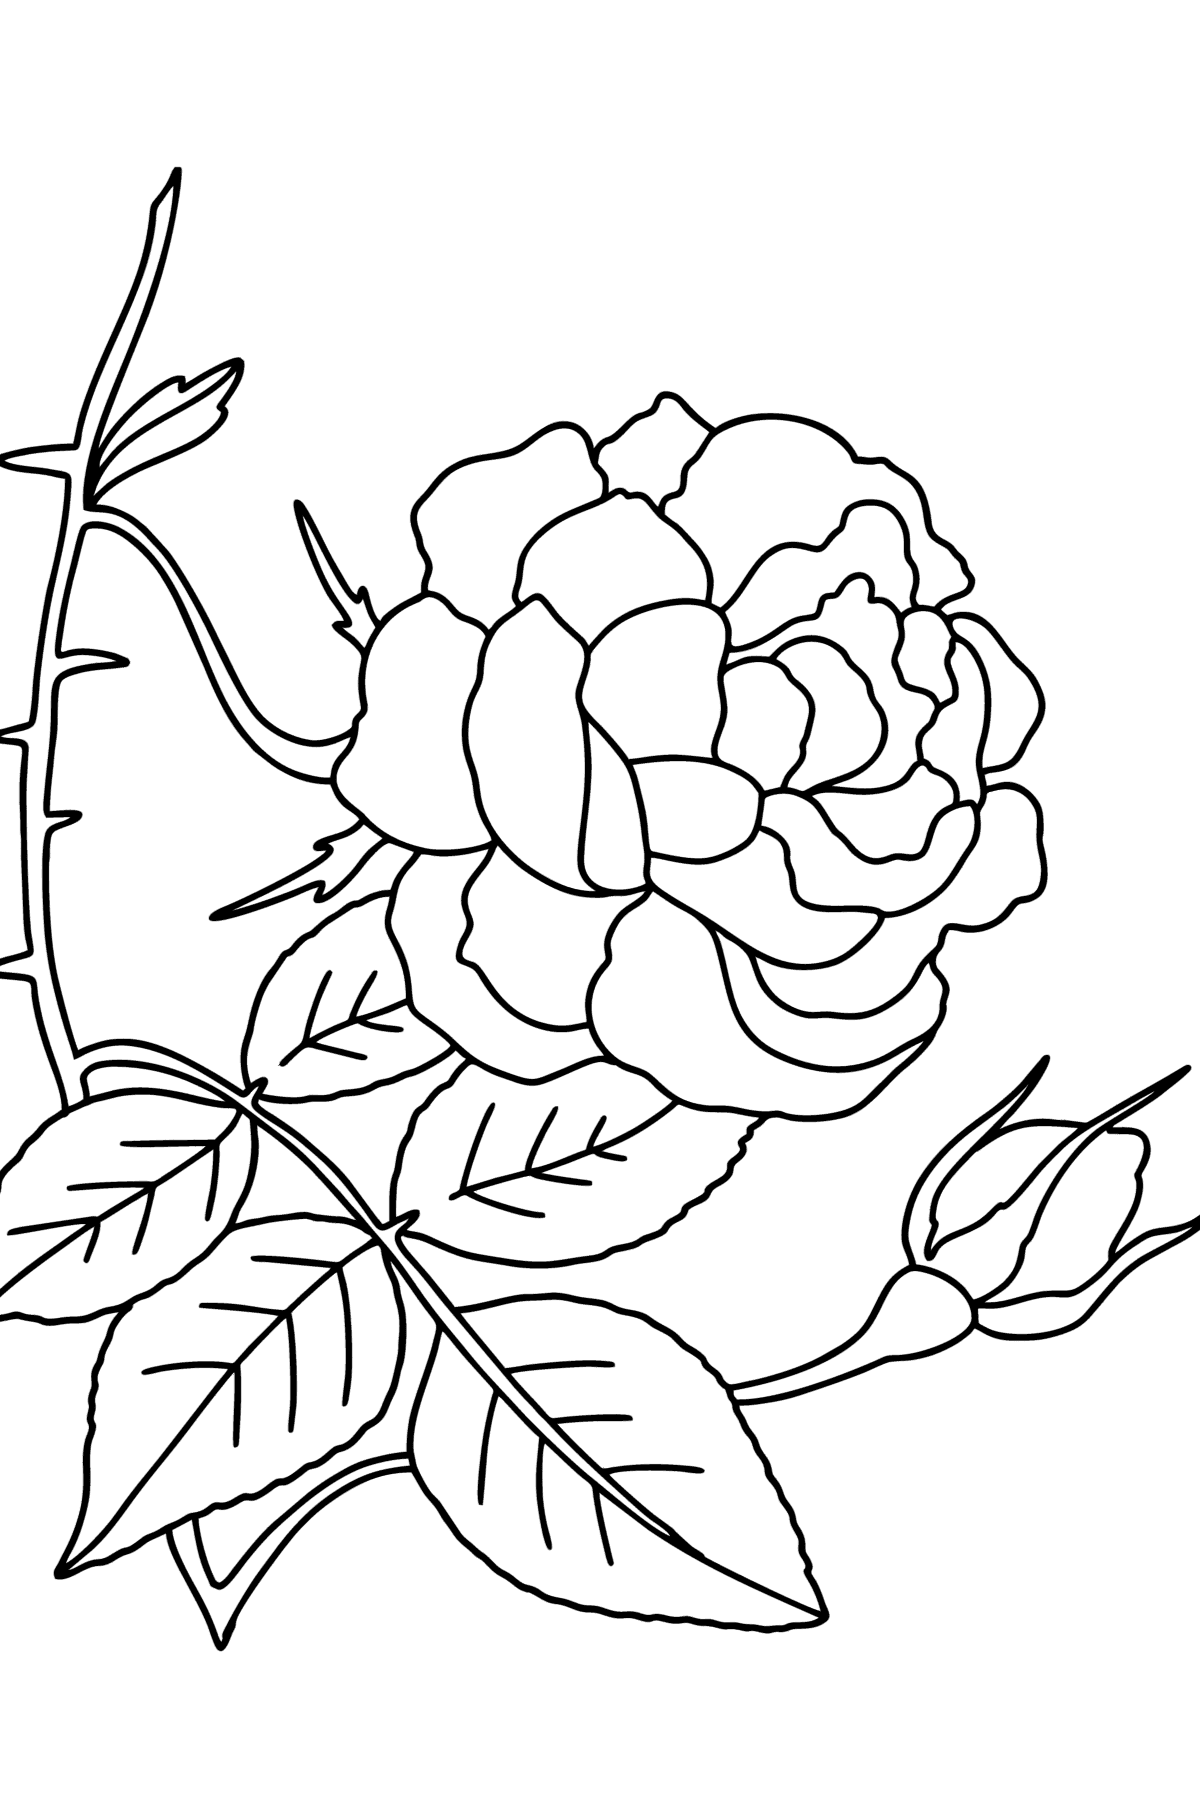 Climbing rose red coloring page - Coloring Pages for Kids